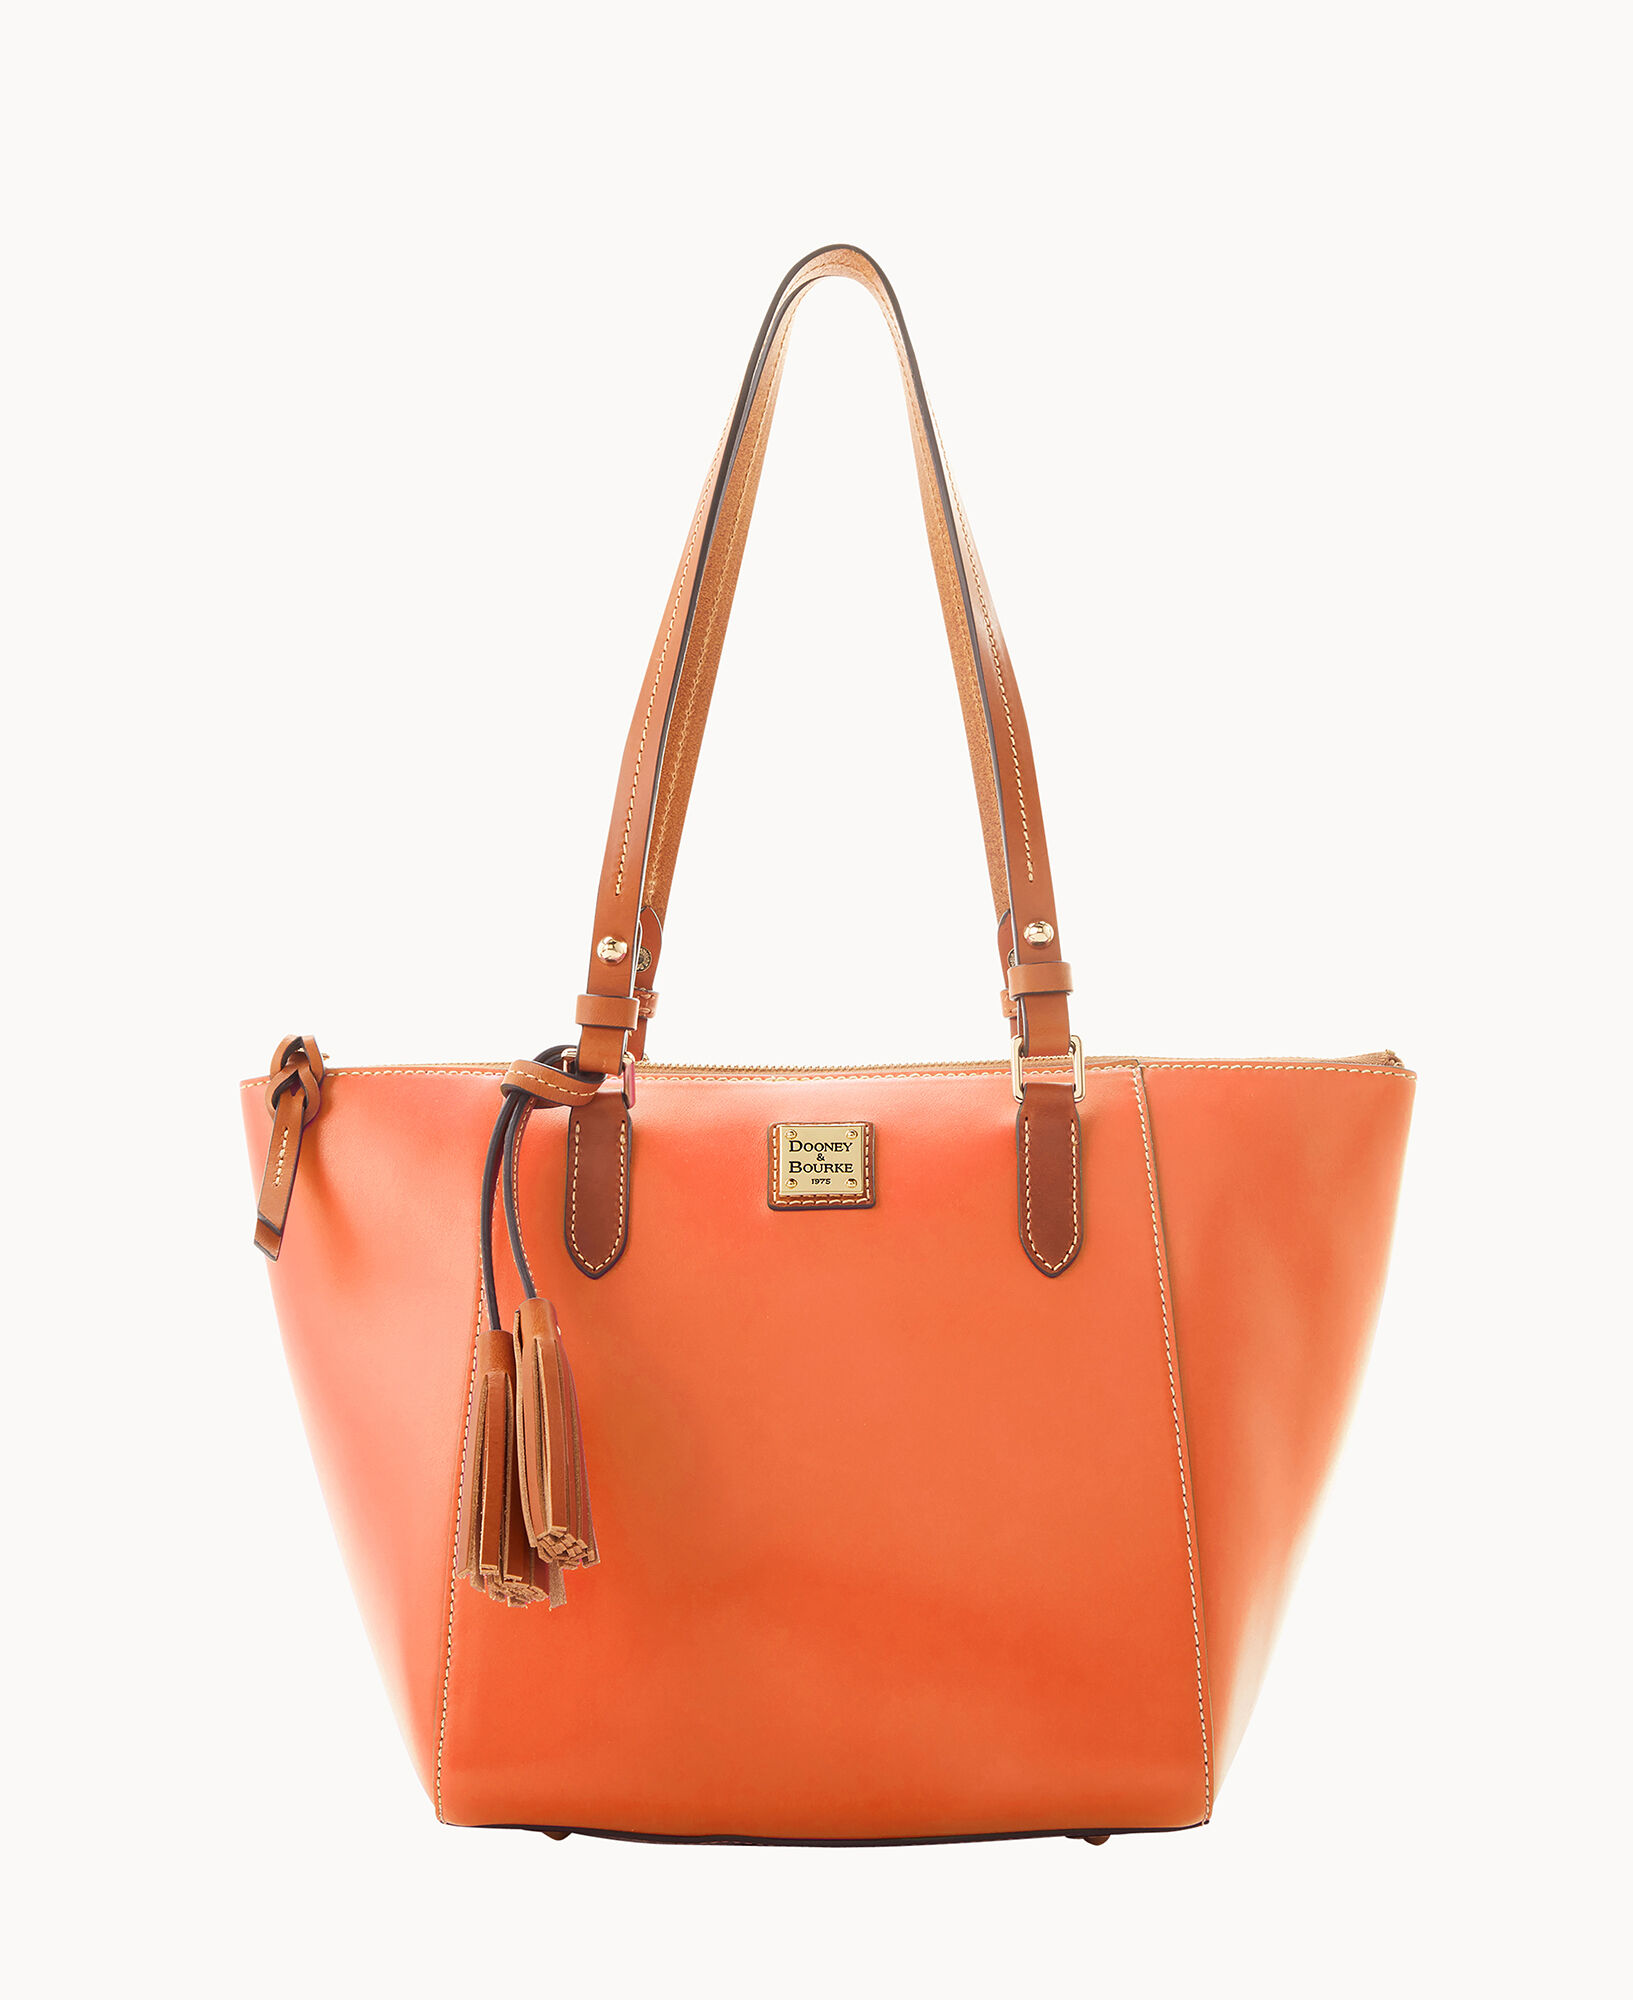 Dooney & Bourke Wexford Leather Maxine Tote